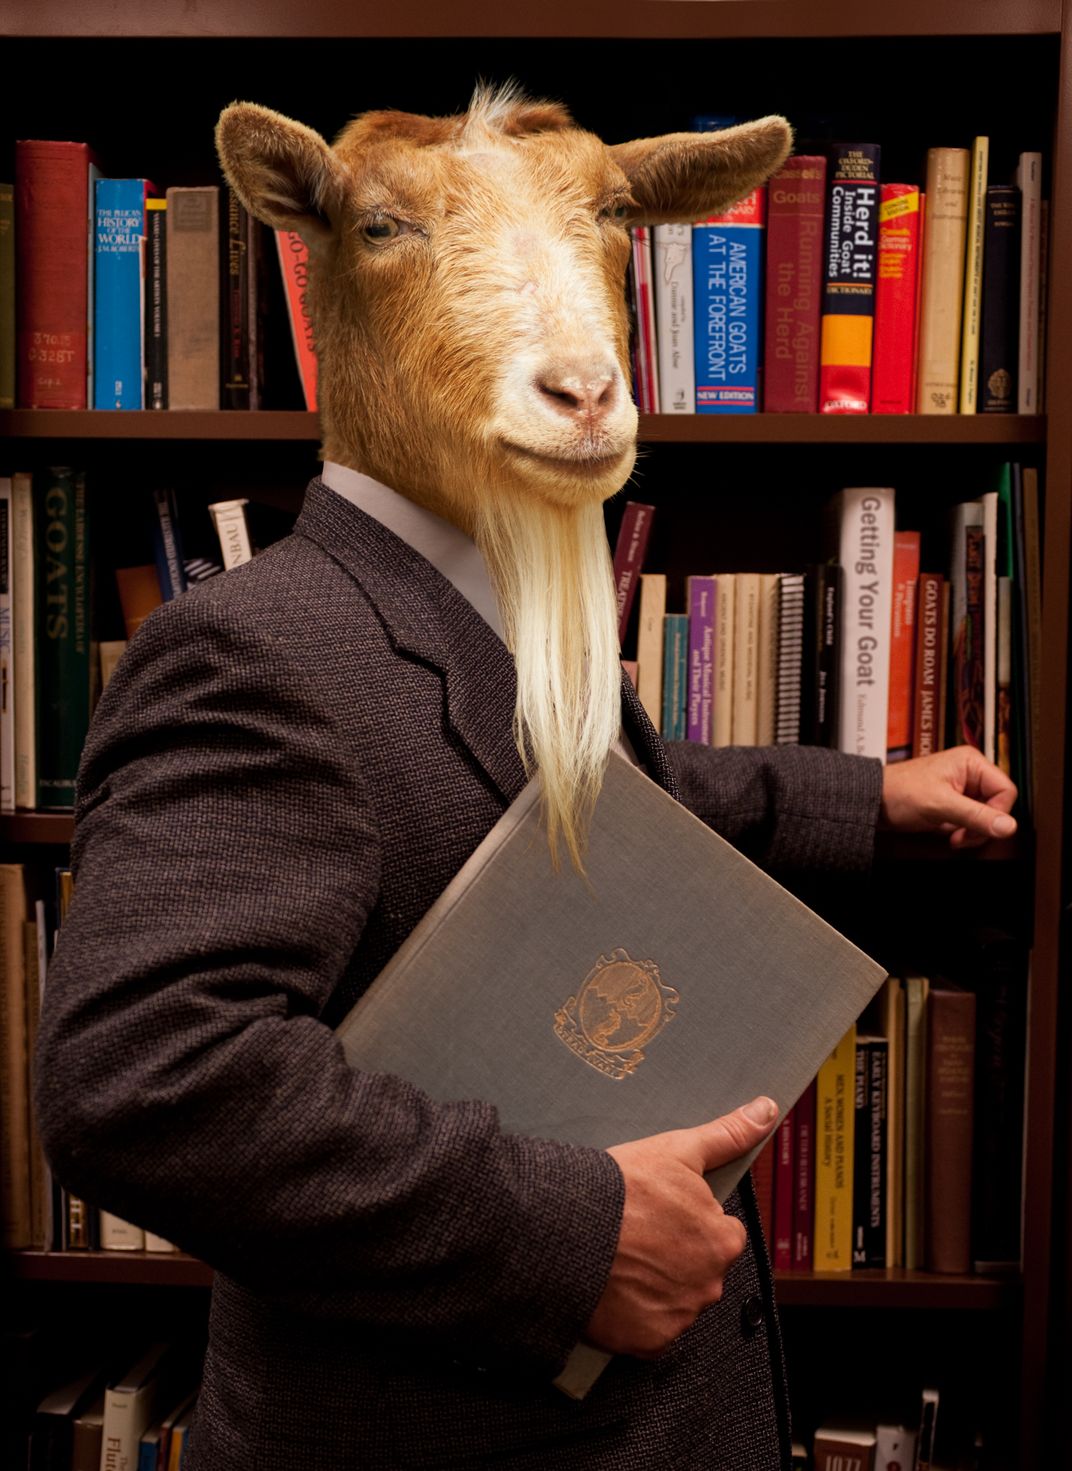 The Old Goat Professor of Goat Studies at the American Animal University  An image created for my mocumentary website on American higher education., Smithsonian Photo Contest